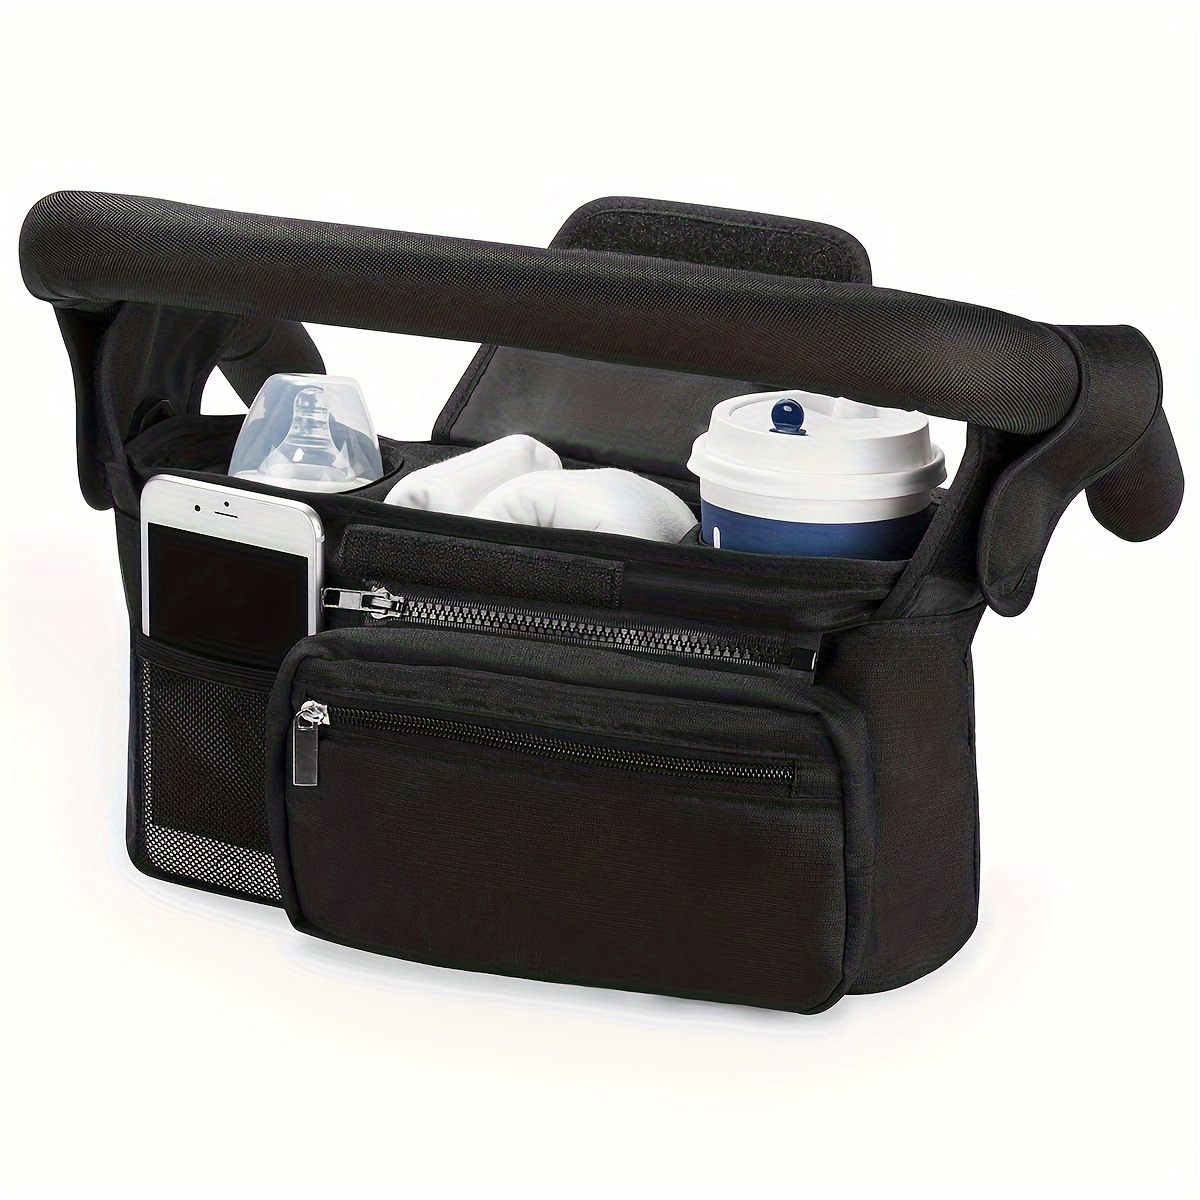 

Universal Stroller Organizer With Diaper Storage, Insulated Cup Holders, Secure Straps, Detachable Bag, Pockets For Toys, Phone And Keys